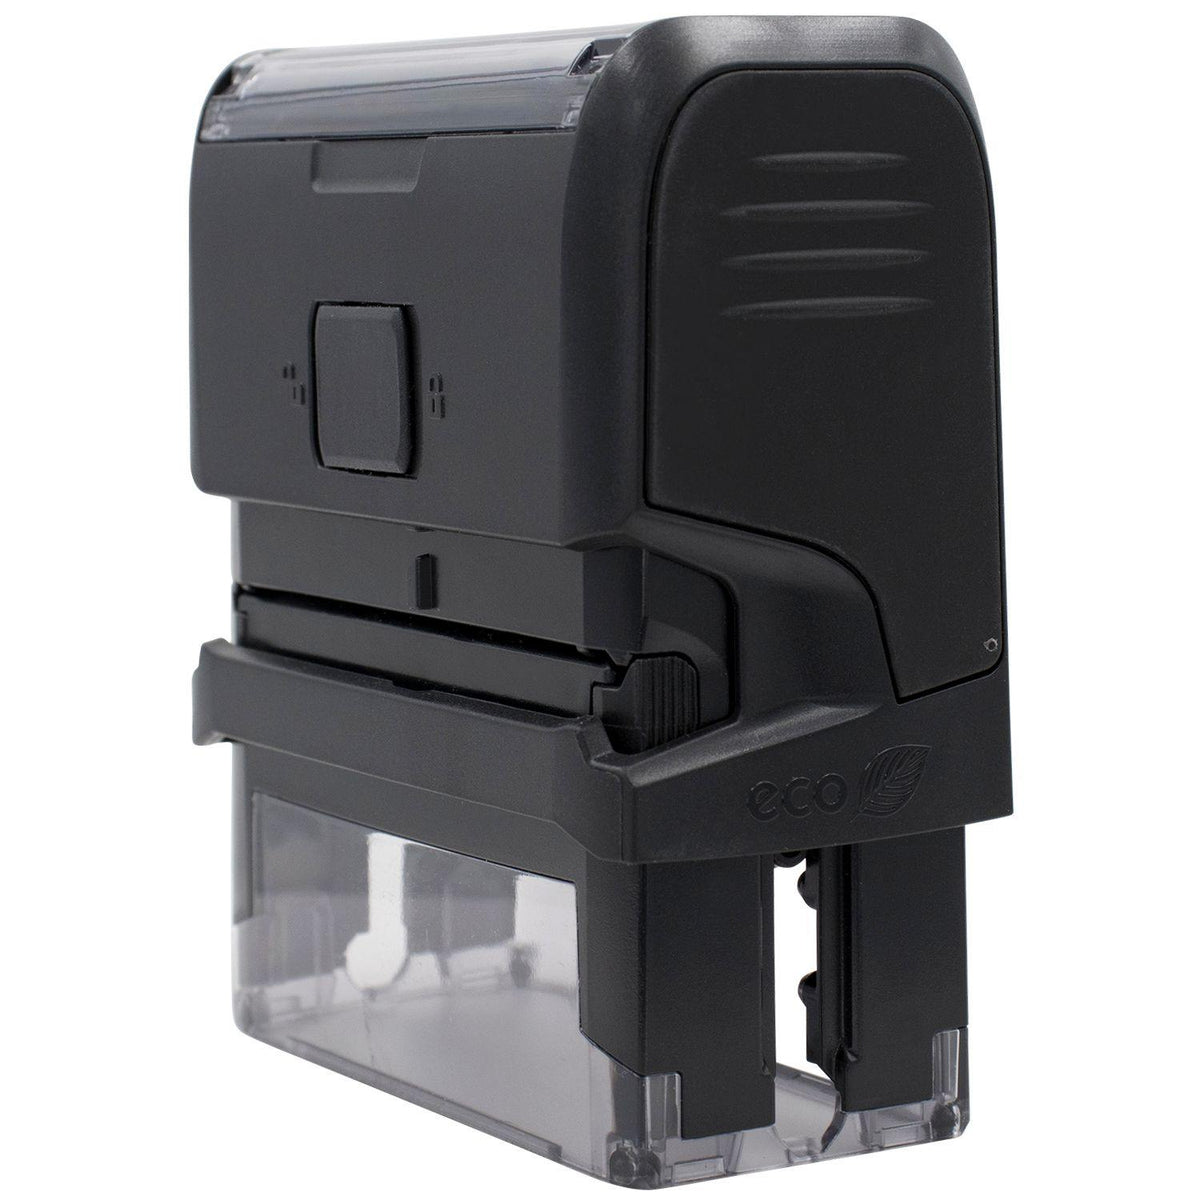 Self Inking Great Progress Stamp - Engineer Seal Stamps - Brand_Trodat, Impression Size_Small, Stamp Type_Self-Inking Stamp, Type of Use_Teacher